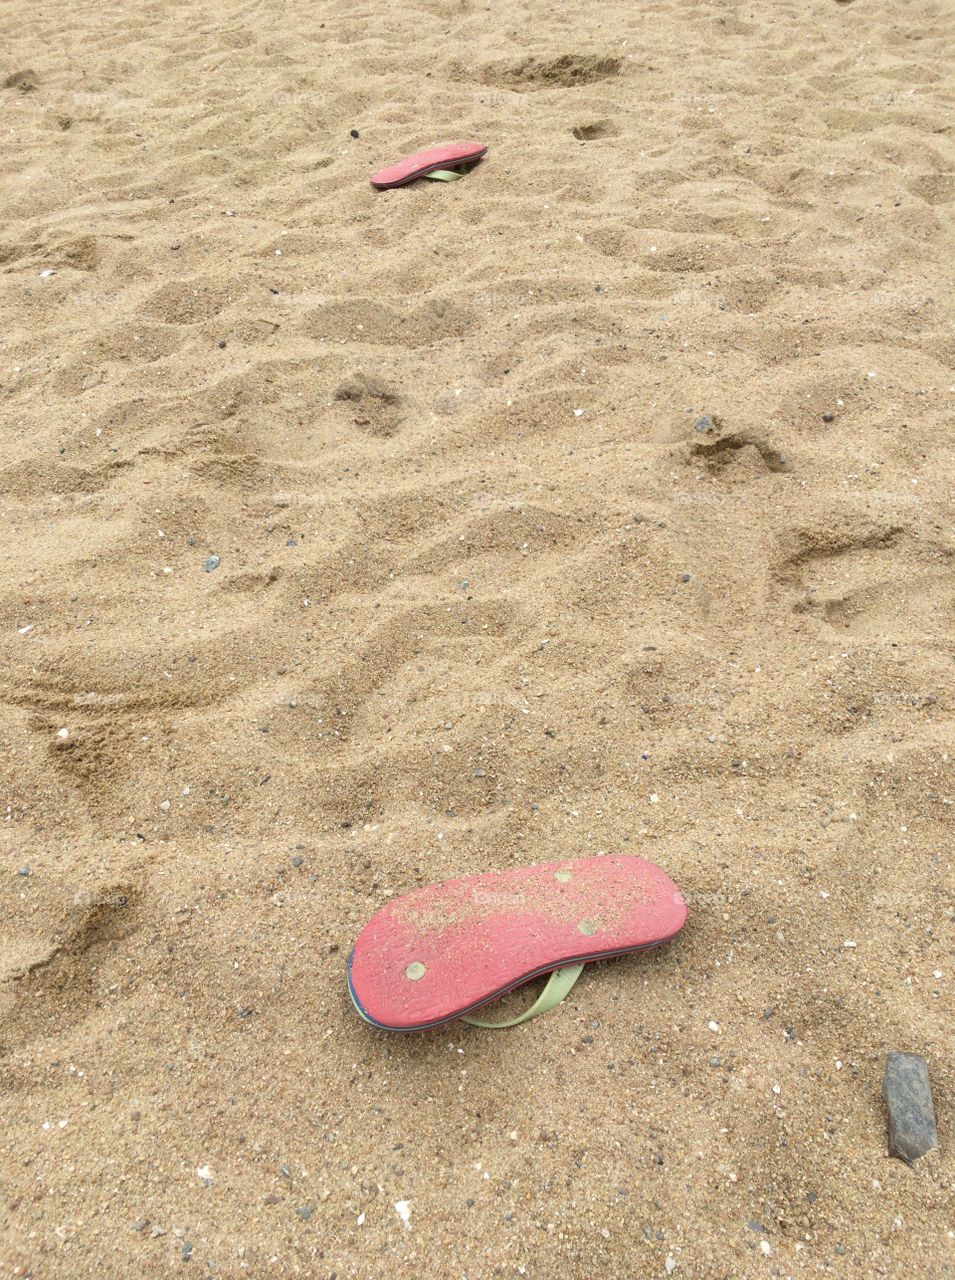 Abandoned sandals on the beach